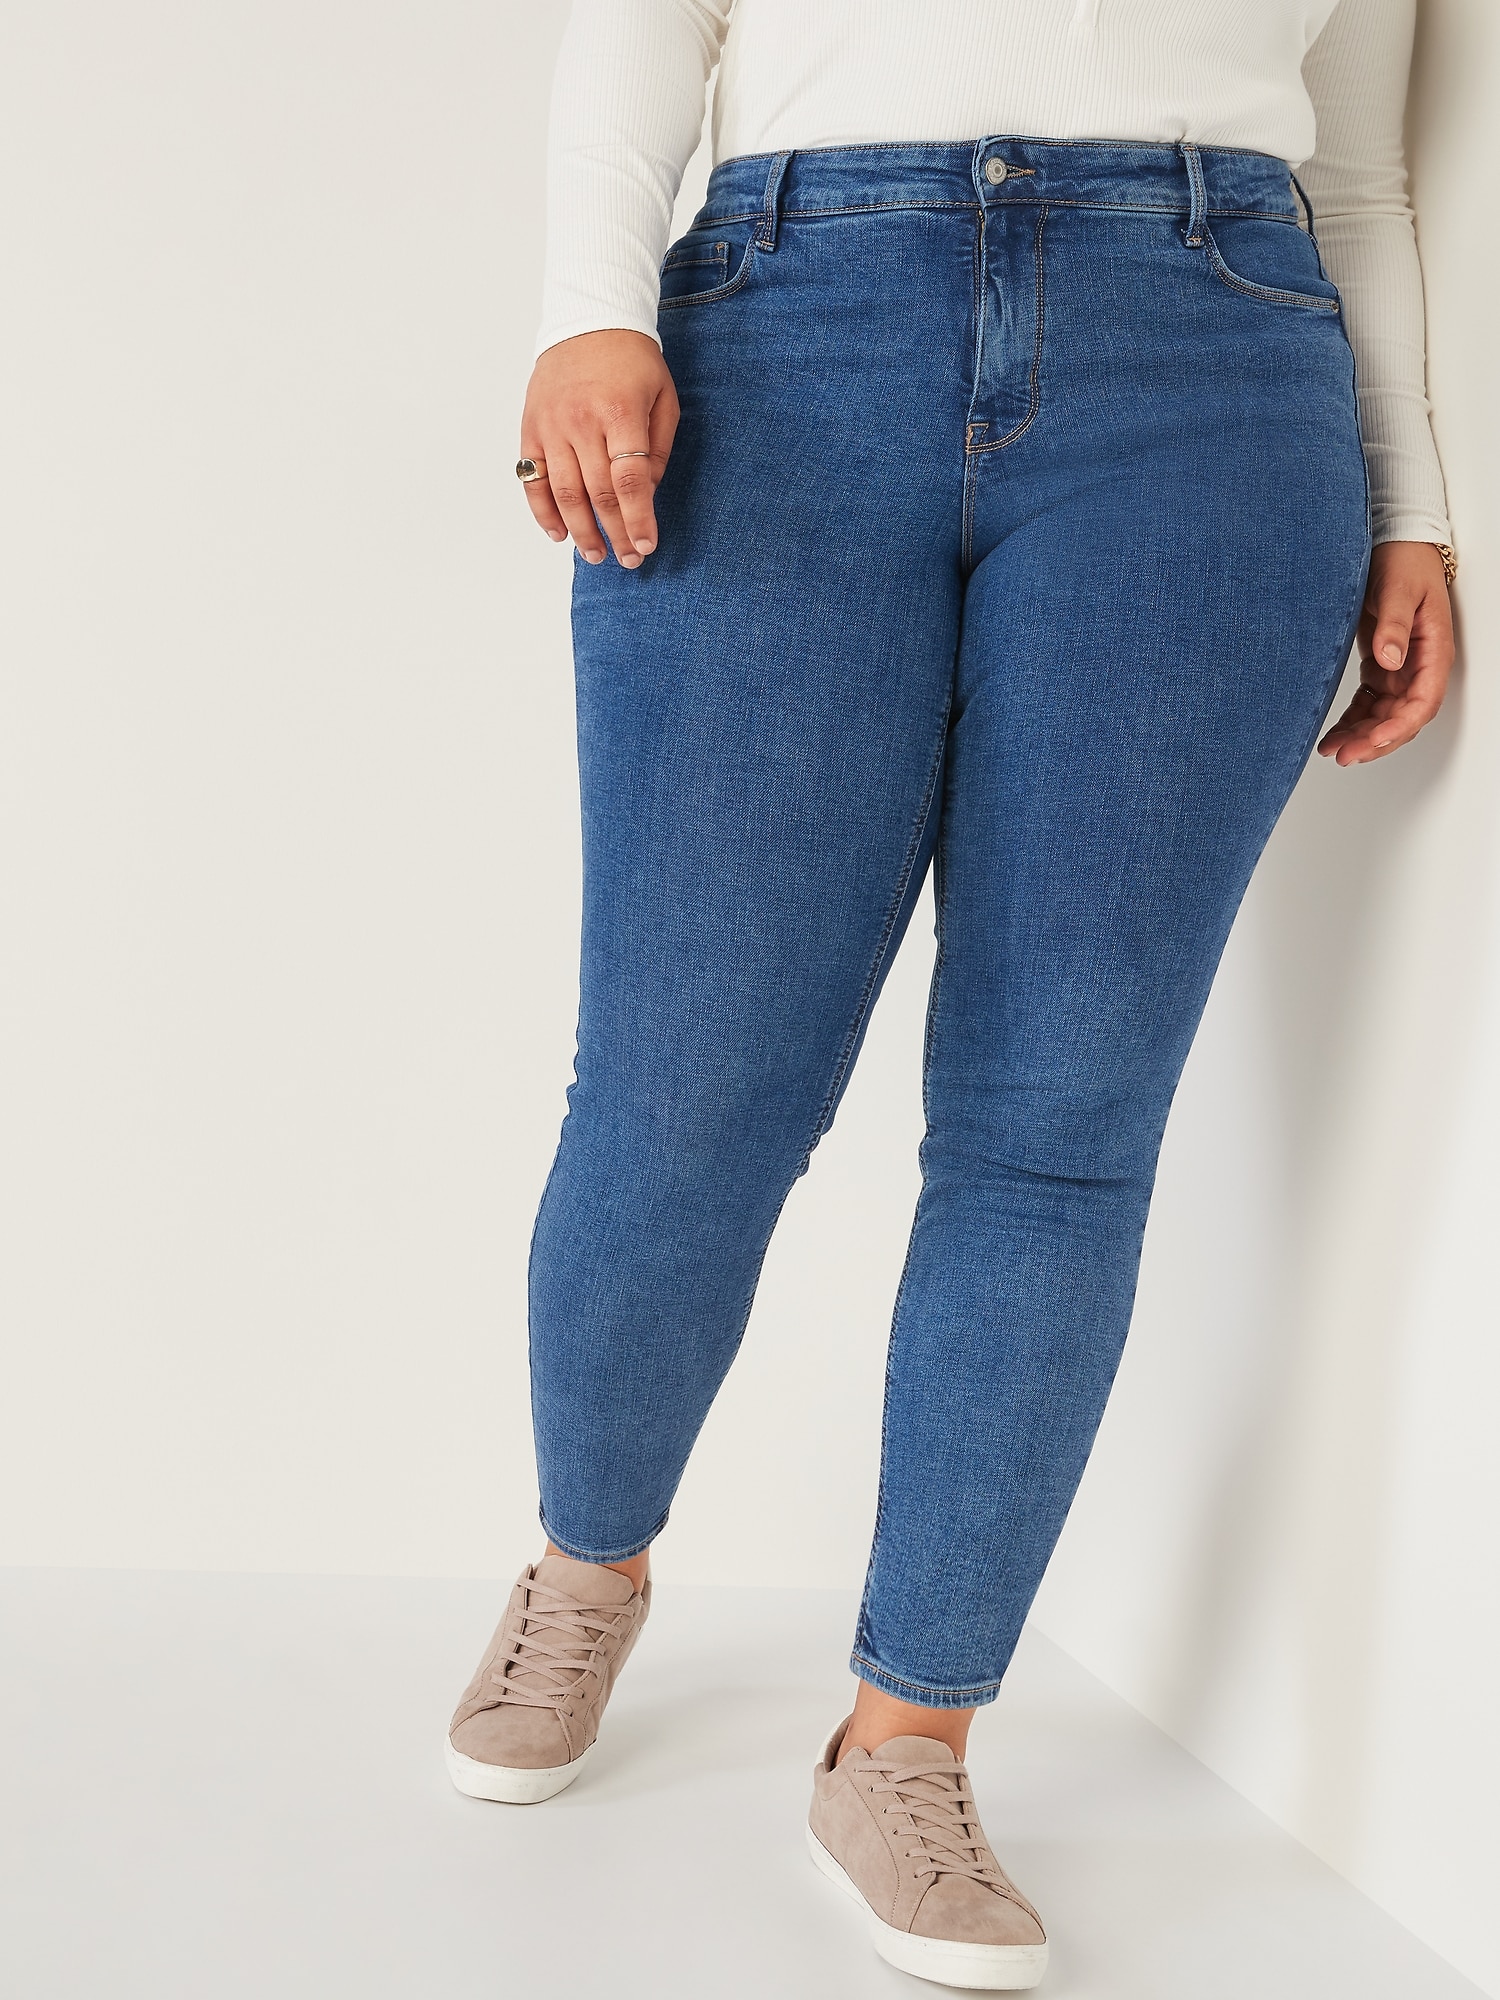 Old Navy Women's High-Waisted Rockstar Super-Skinny Jeans - - Plus Size 28